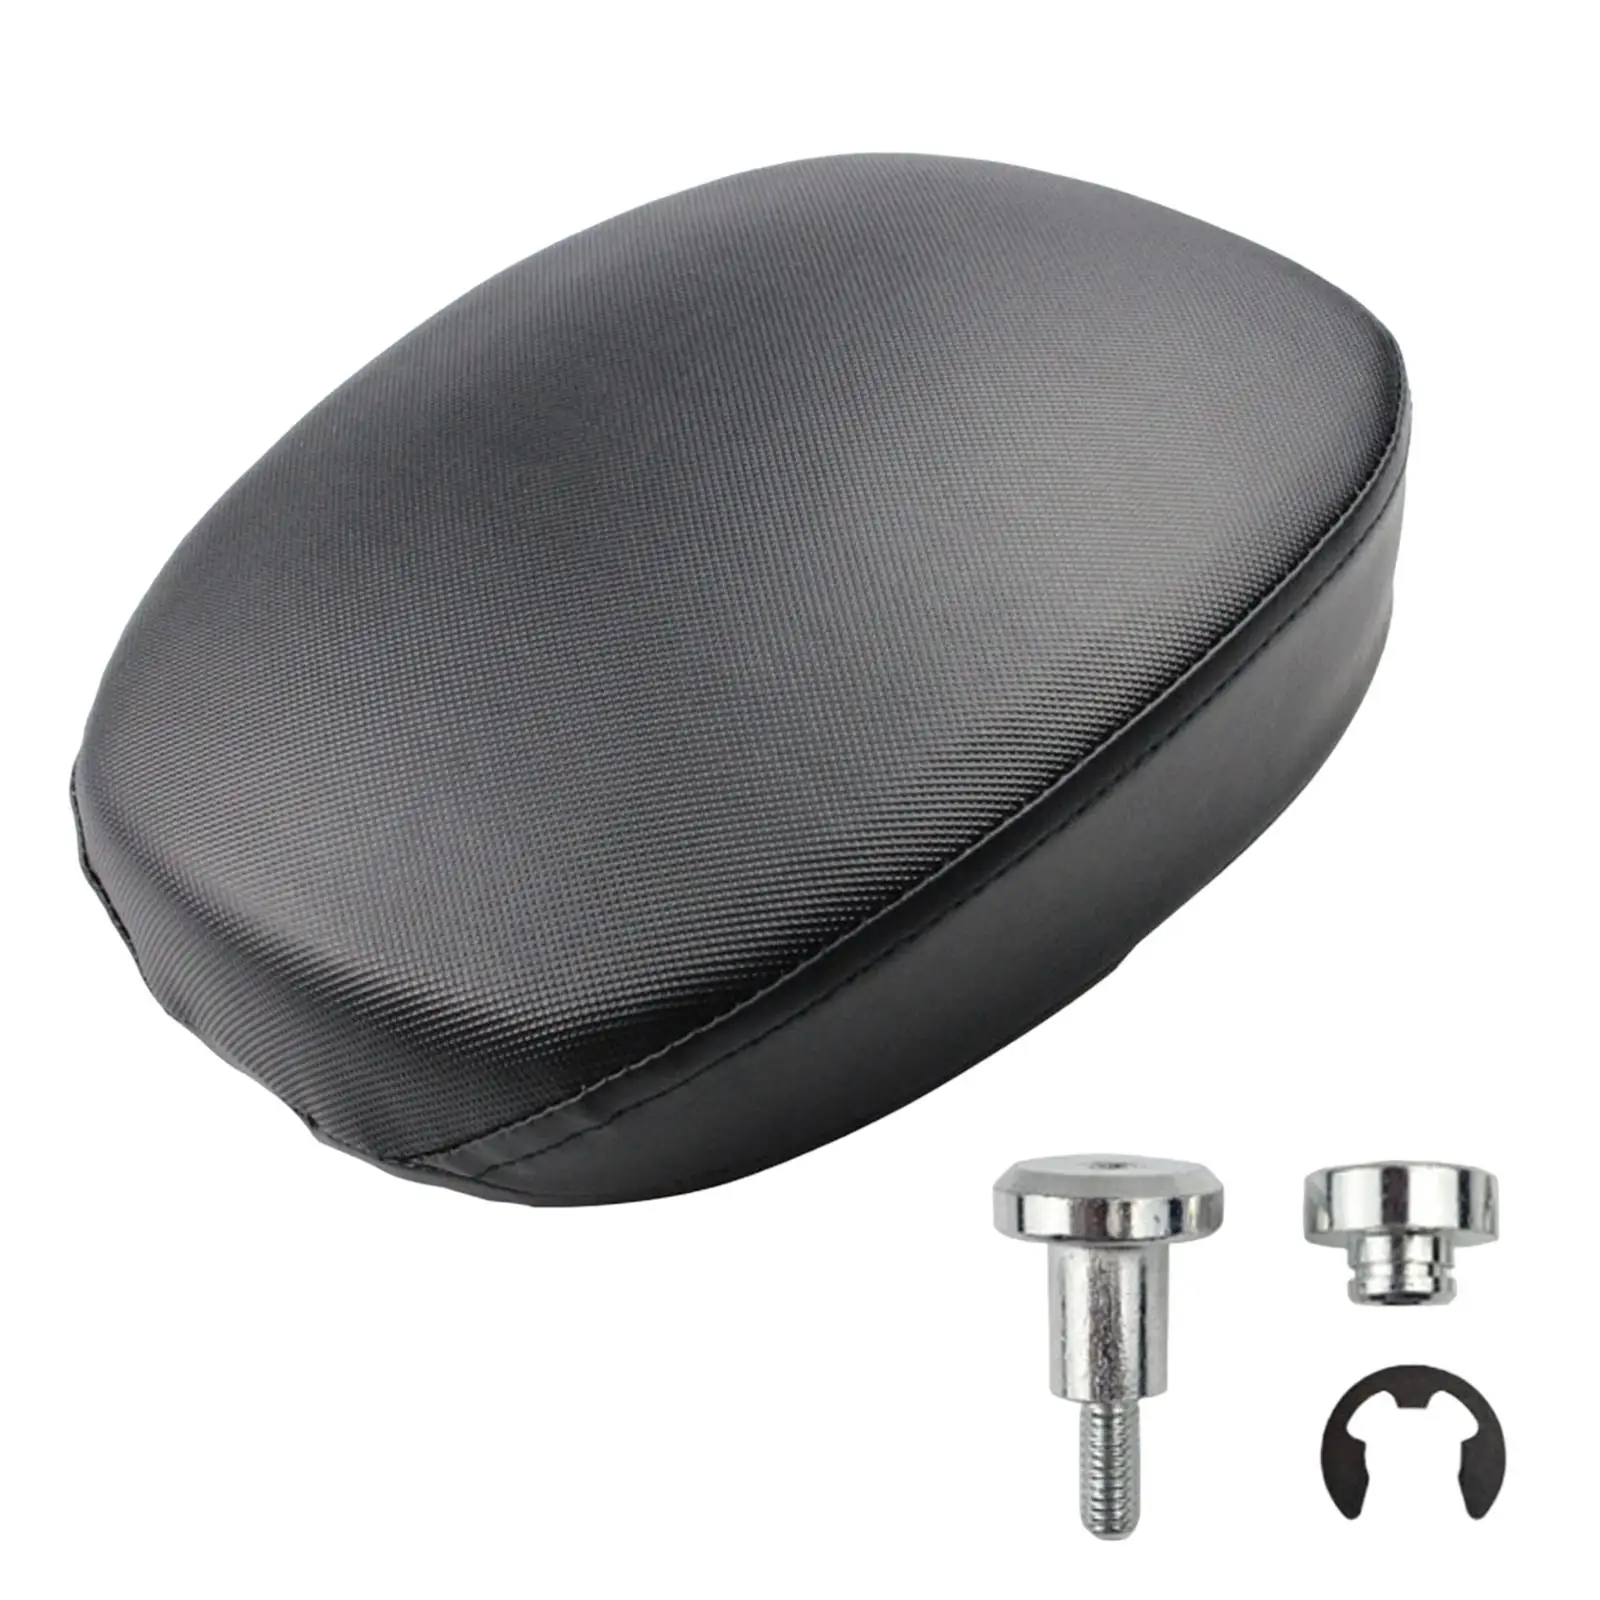 Motorcycle Rear Passenger Seat Pillion Pad for 883 x48 Accessory